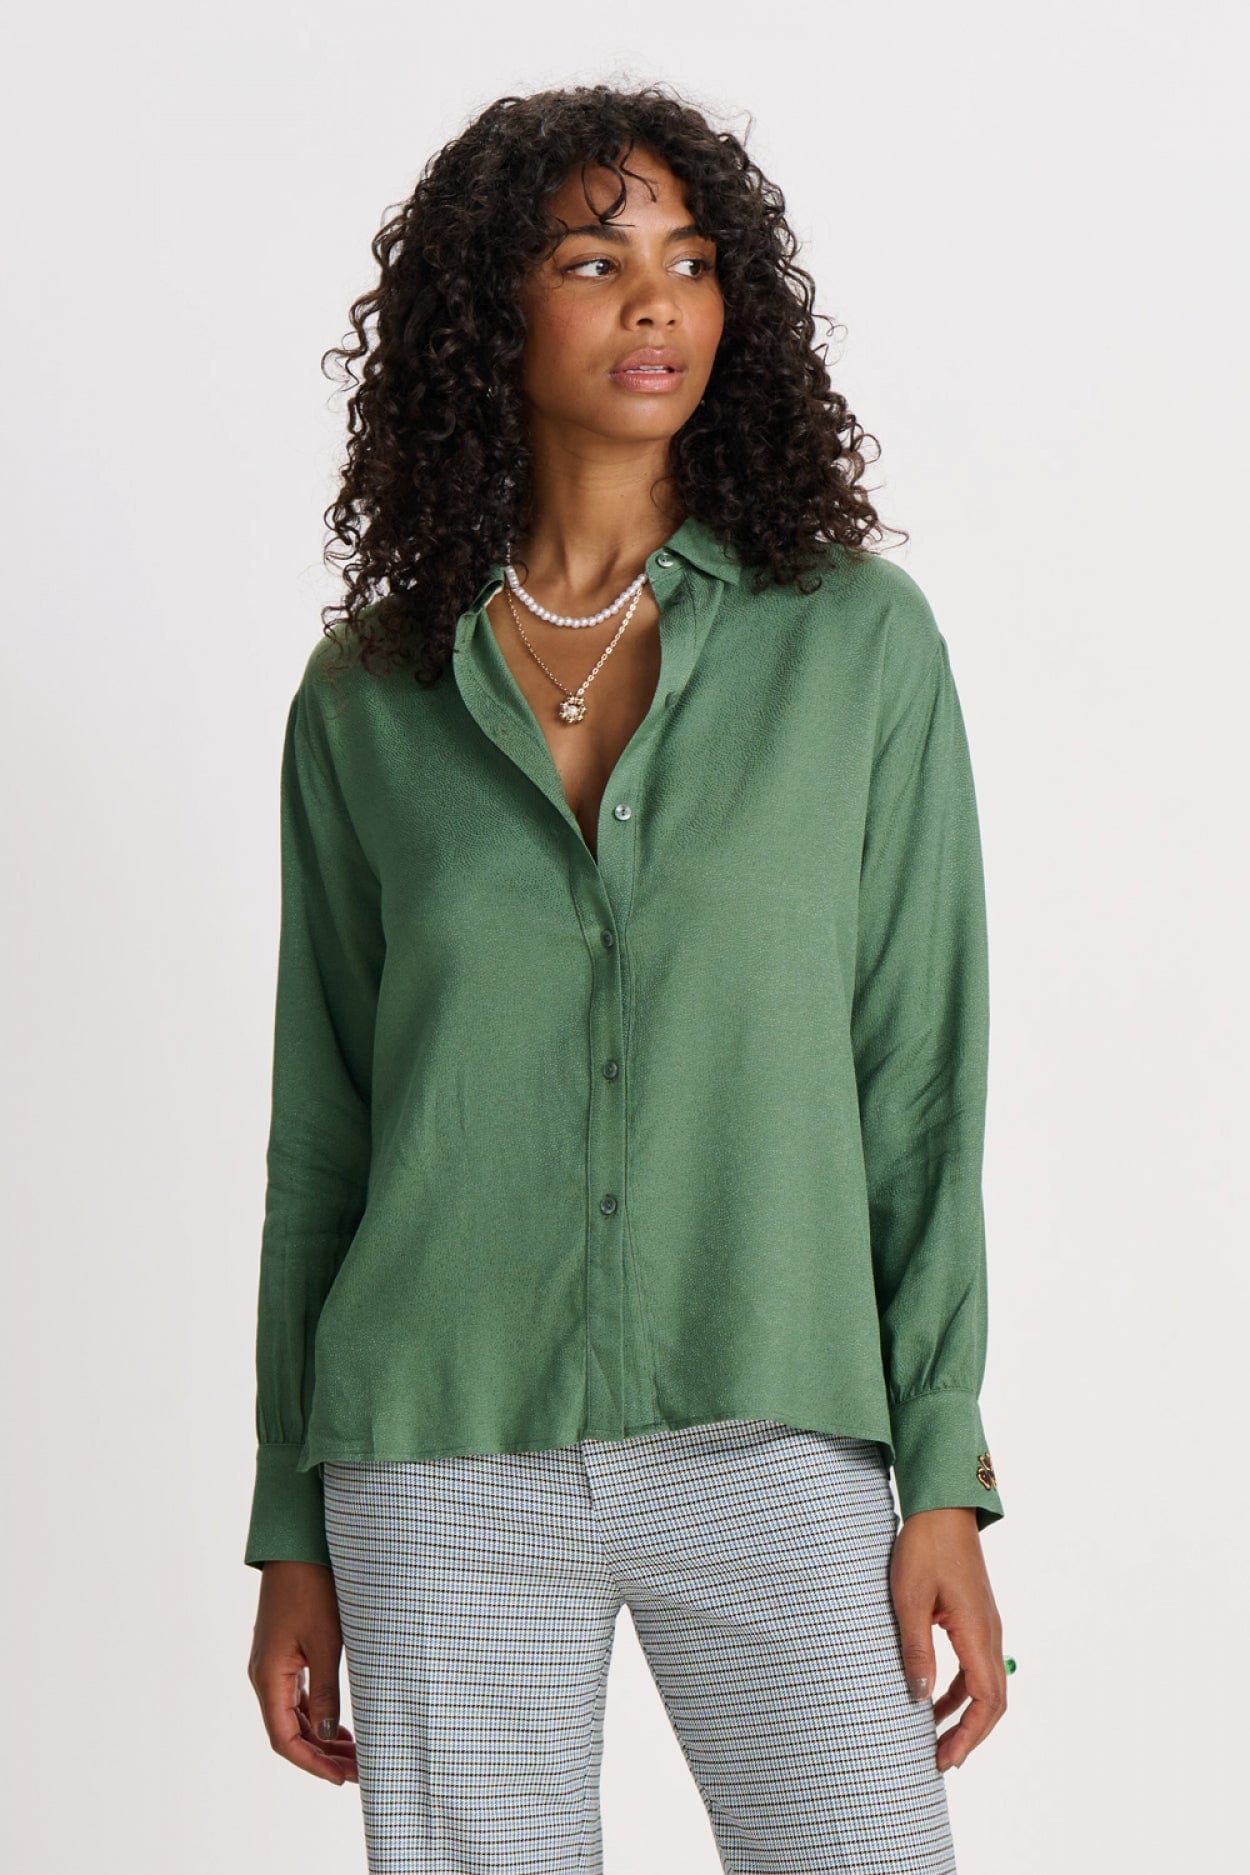 POM Amsterdam Blouses BLOUSE - Milly Mythical Green